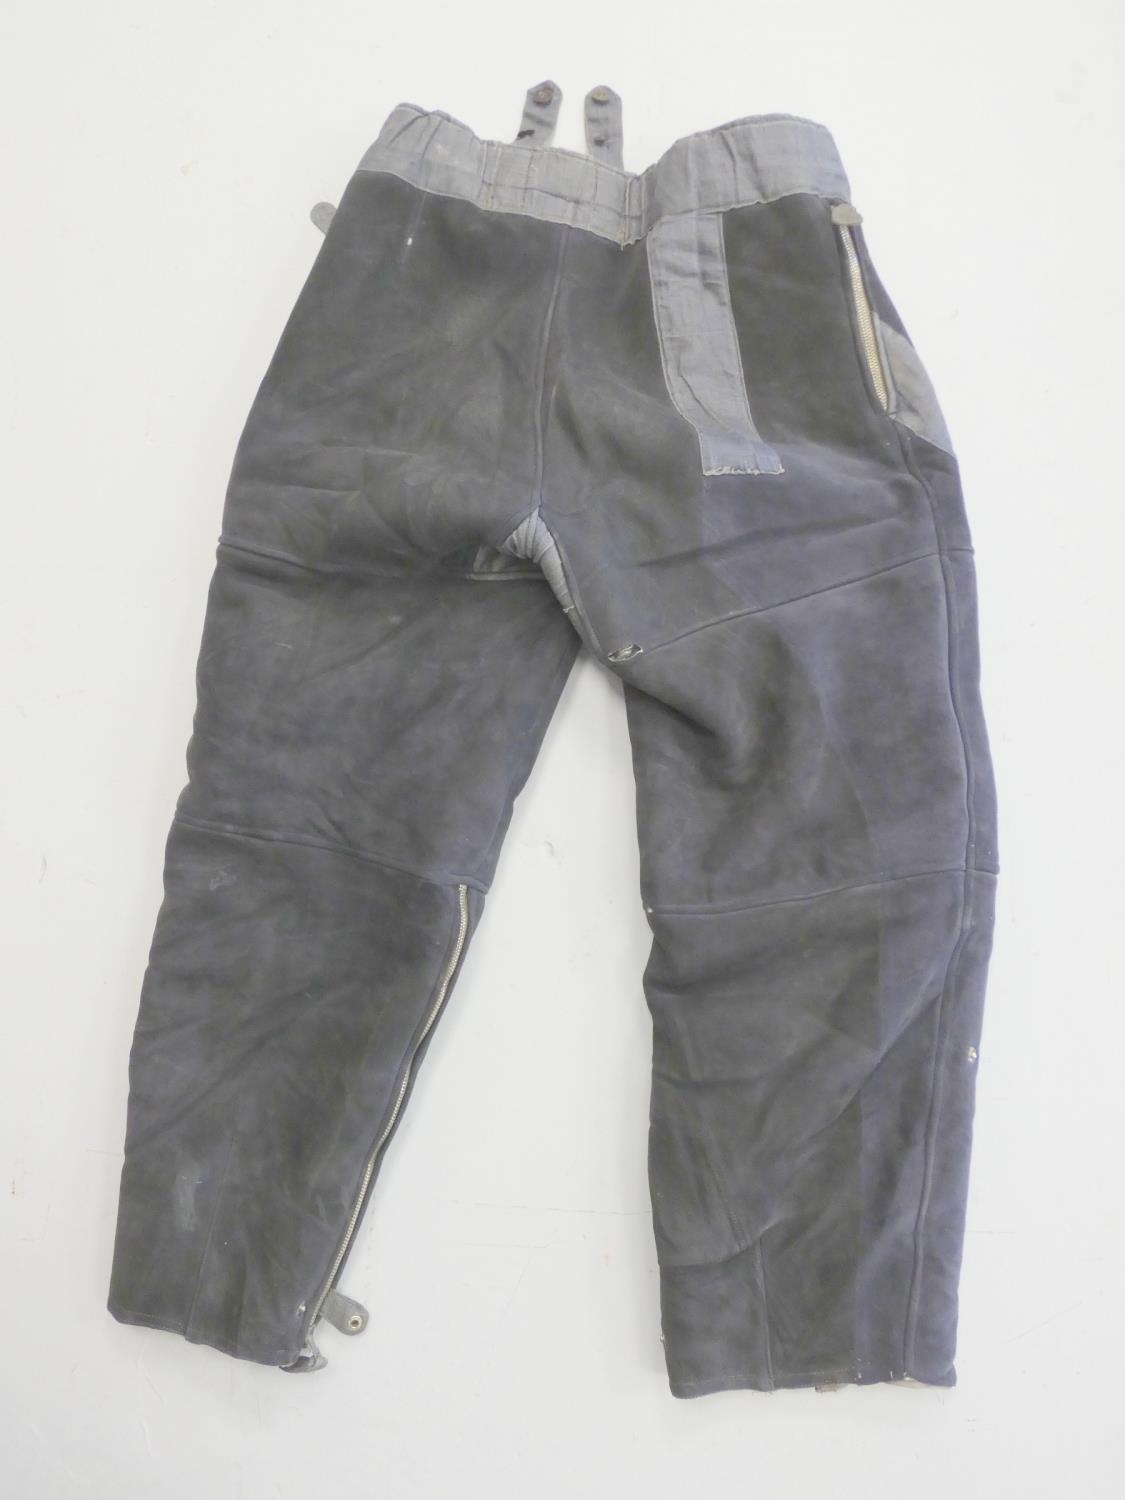 WW2 Third Reich German Luftwaffe Flying Suit ''Kanalhose'' Trousers, blue grey suede and herringbone - Image 3 of 7